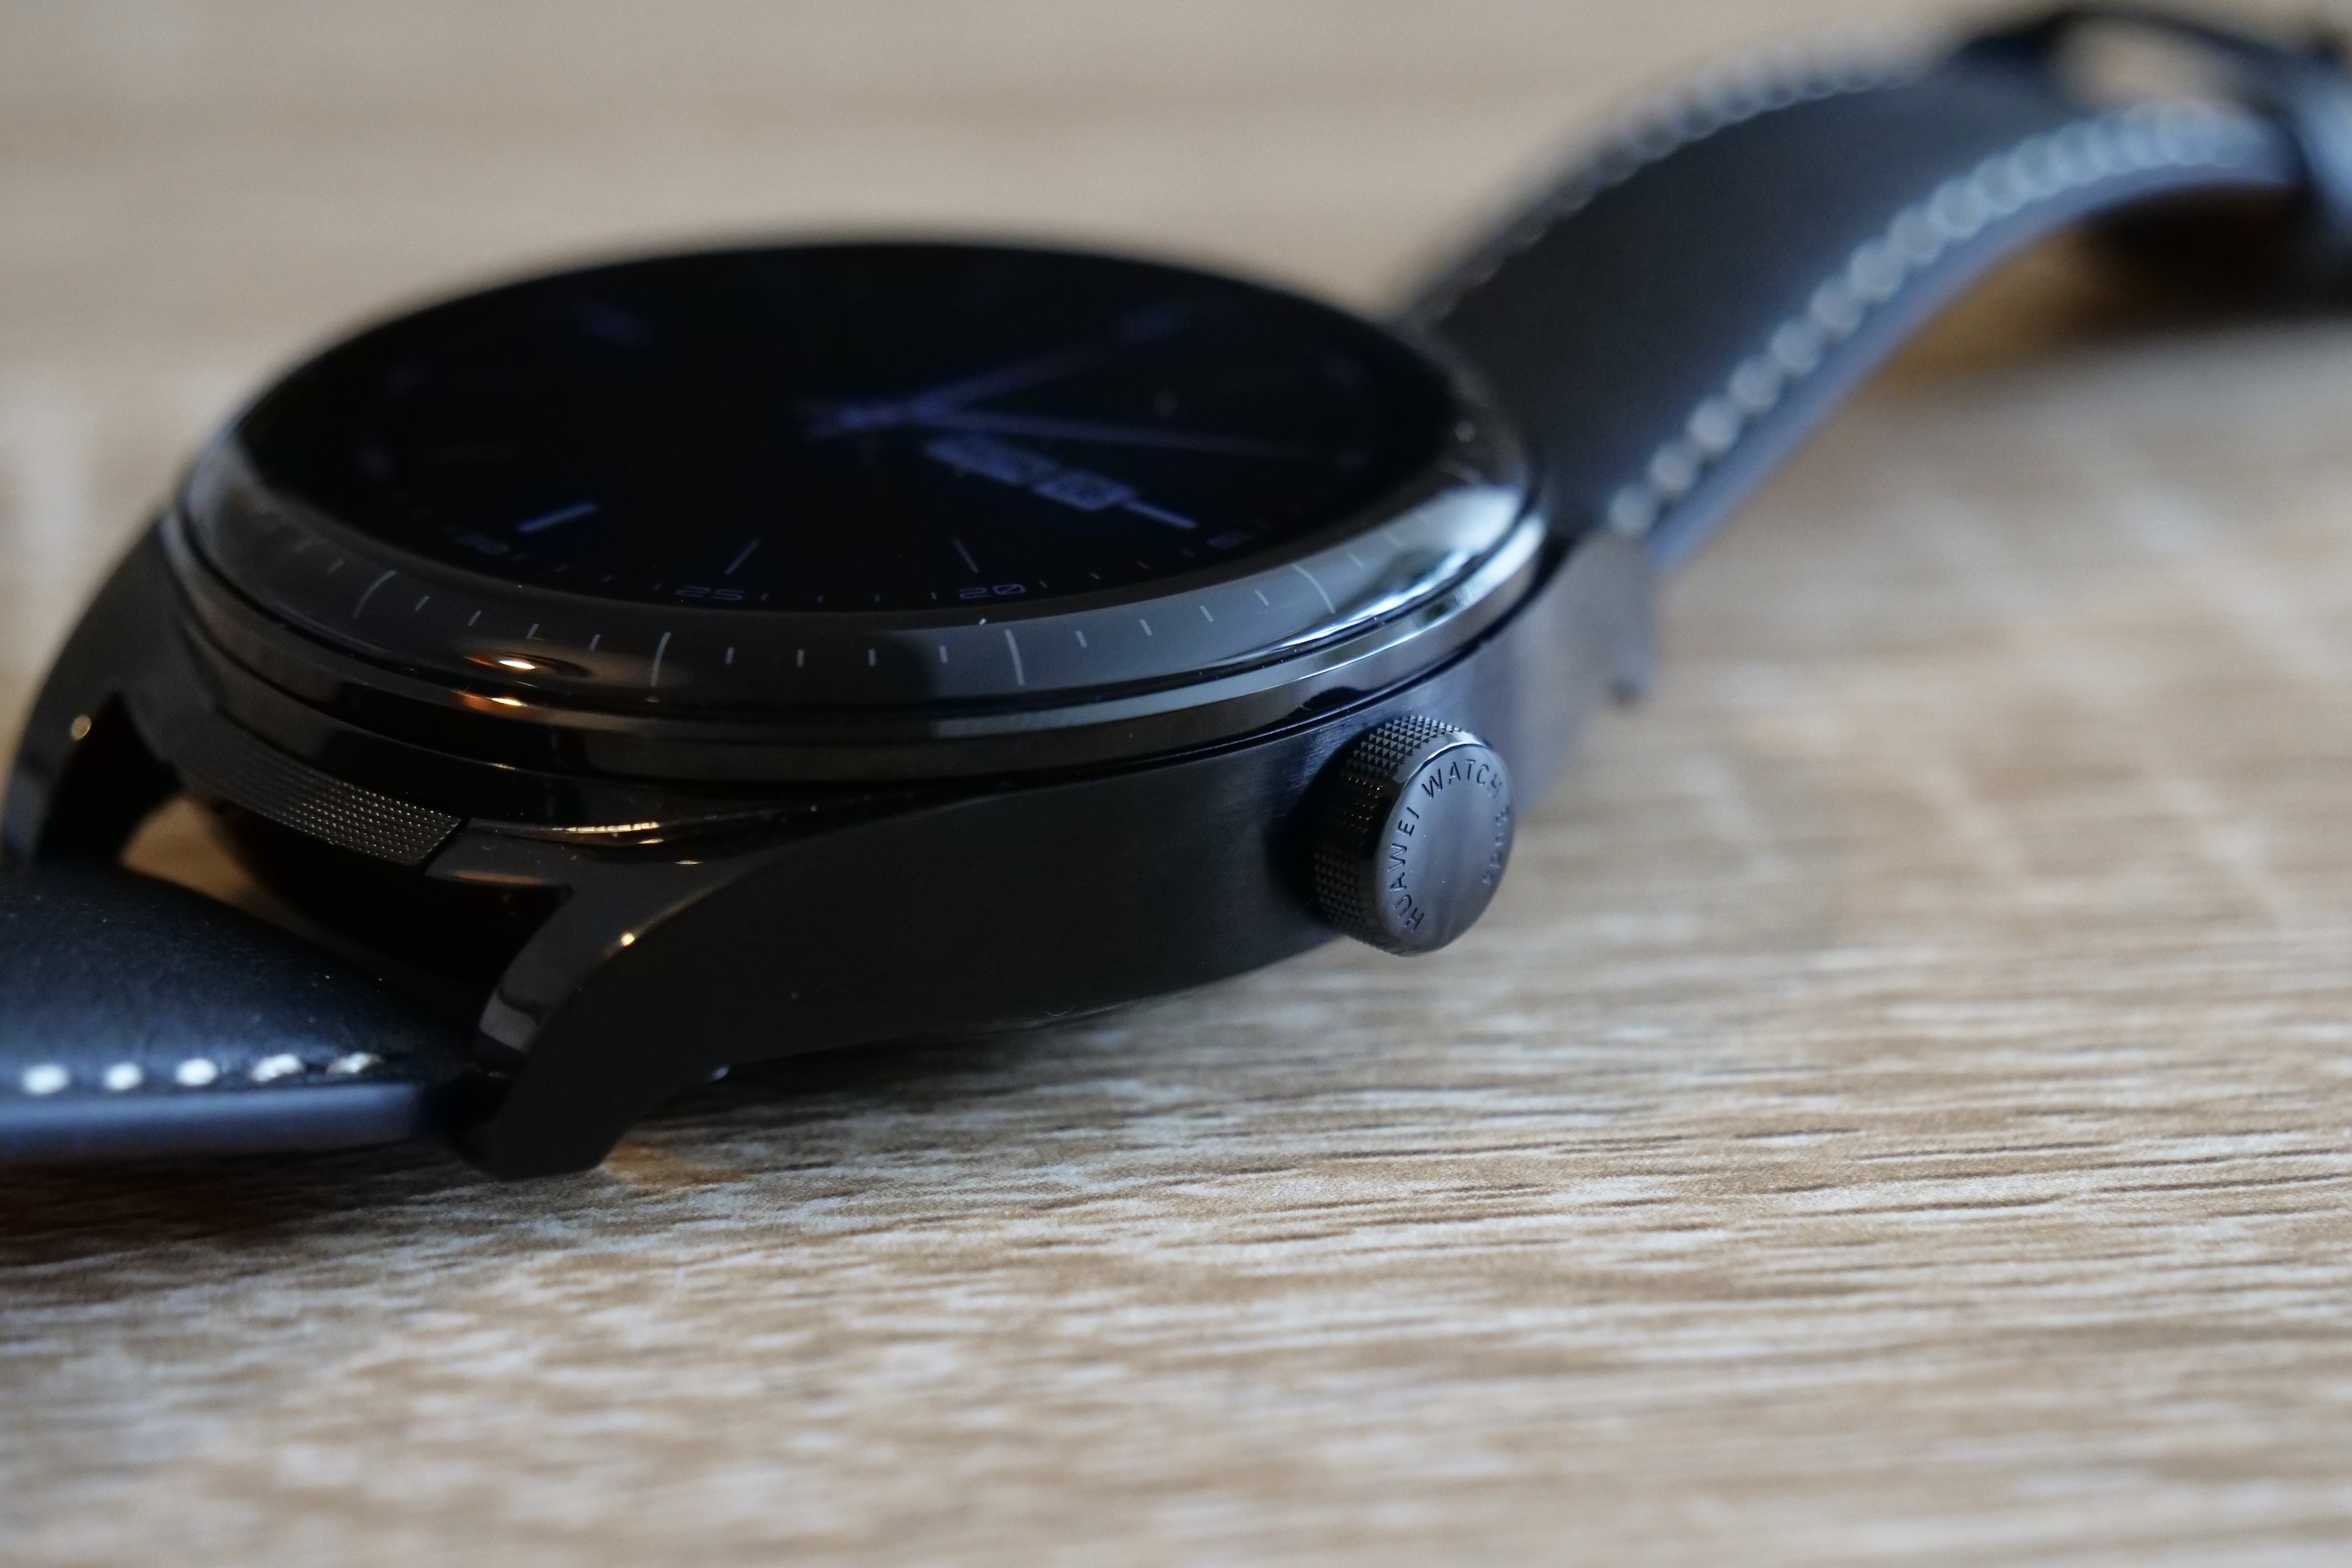 Huawei Watch Buds review: I couldn't live with this gadget